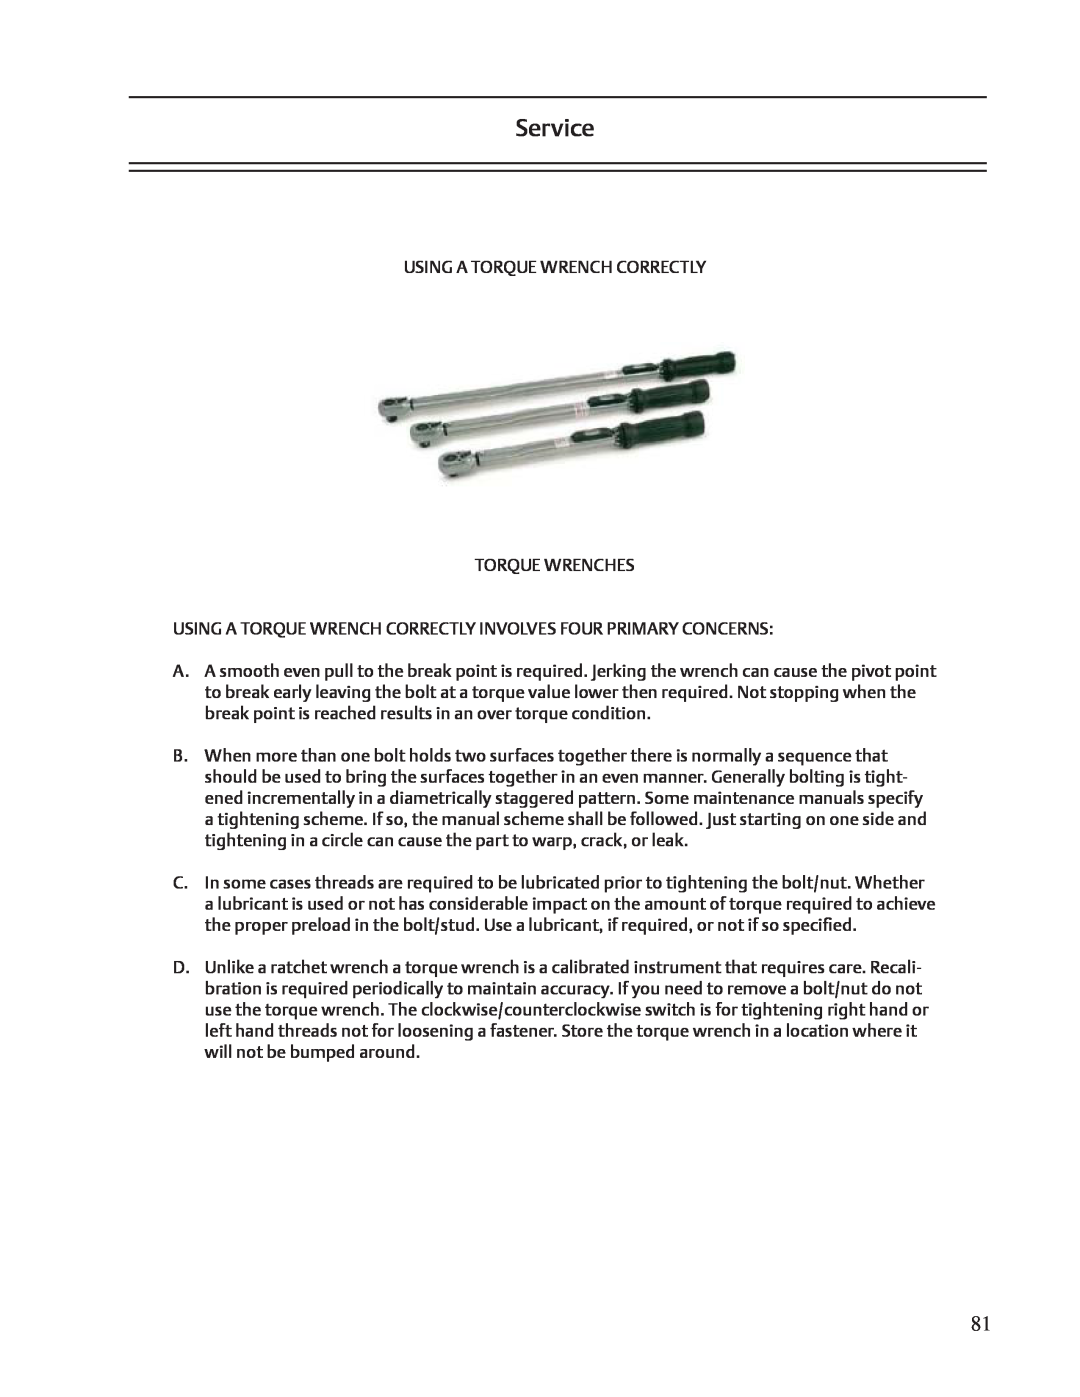 Emerson VSR, VSM, VSS service manual Service, Using A Torque Wrench Correctly Torque Wrenches 